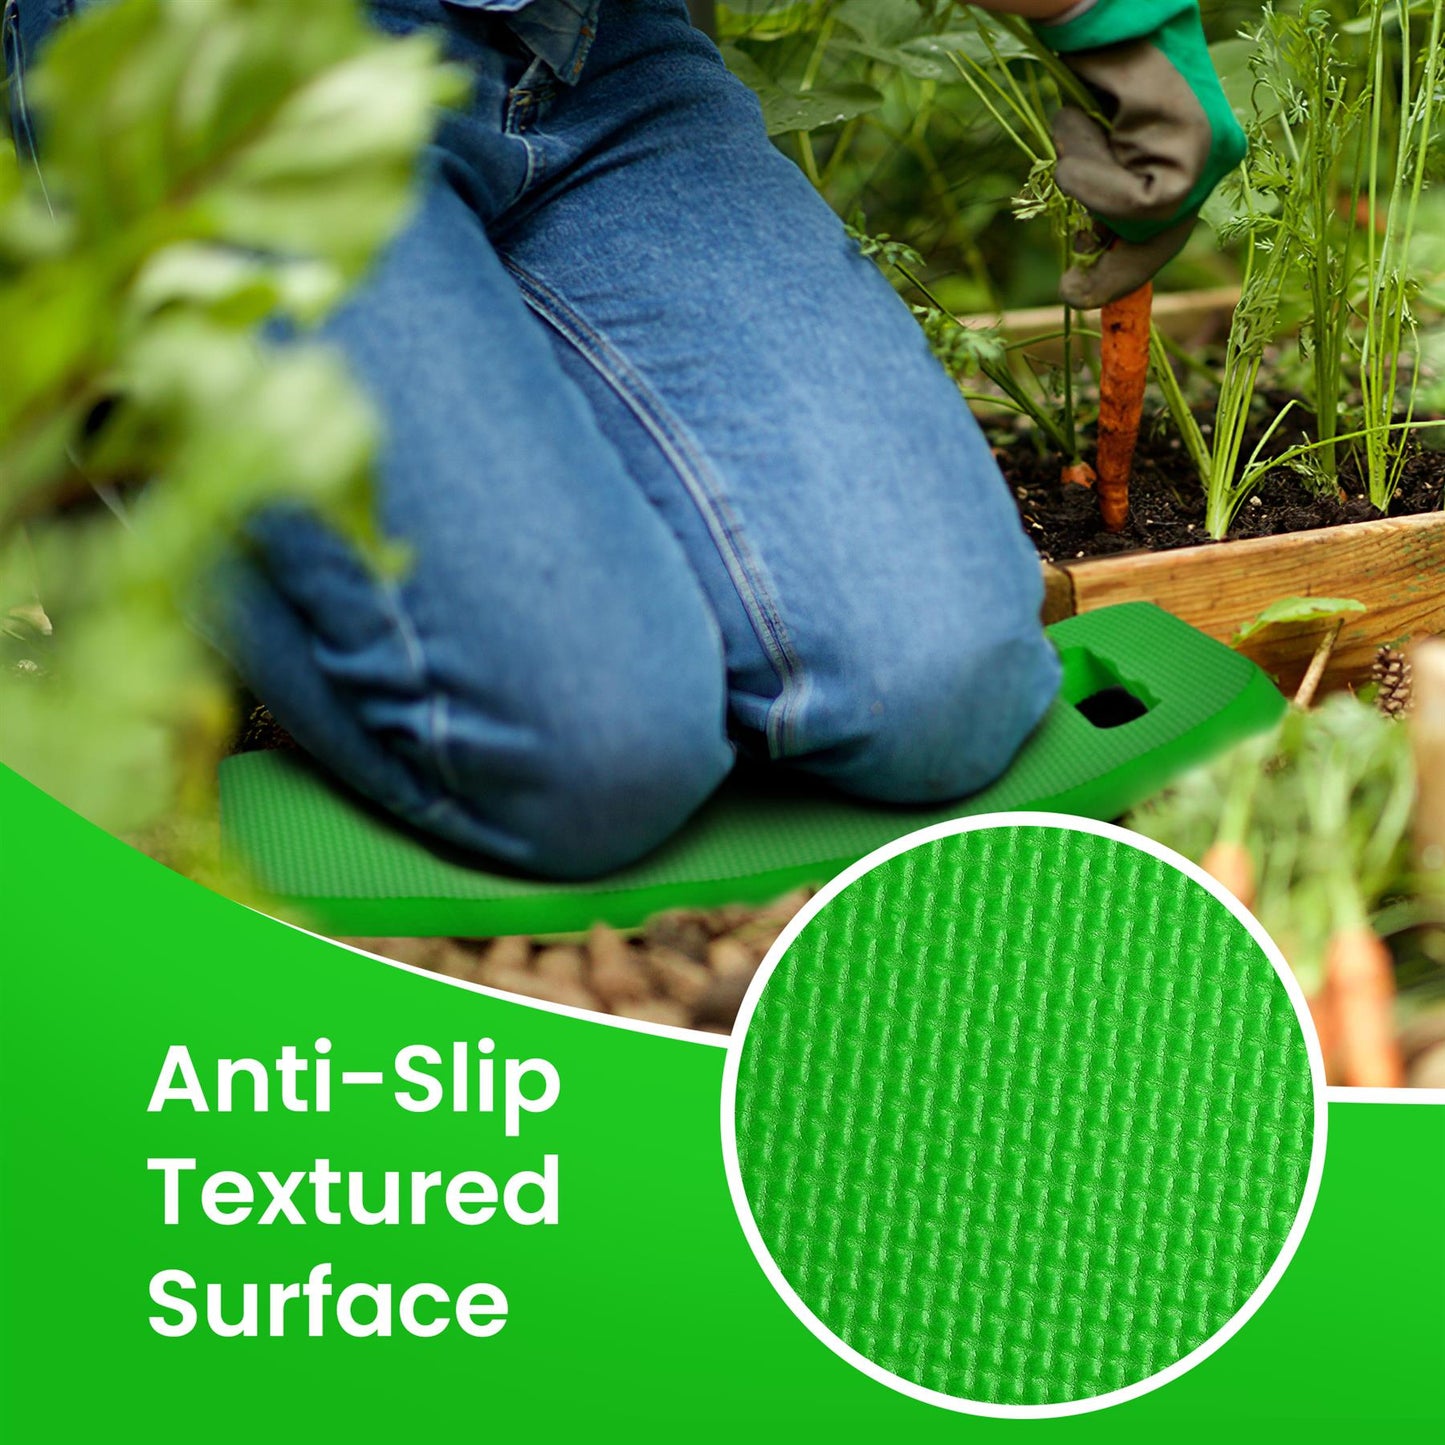 Soft Foam Pad Designed To Protect Knees While Gardening